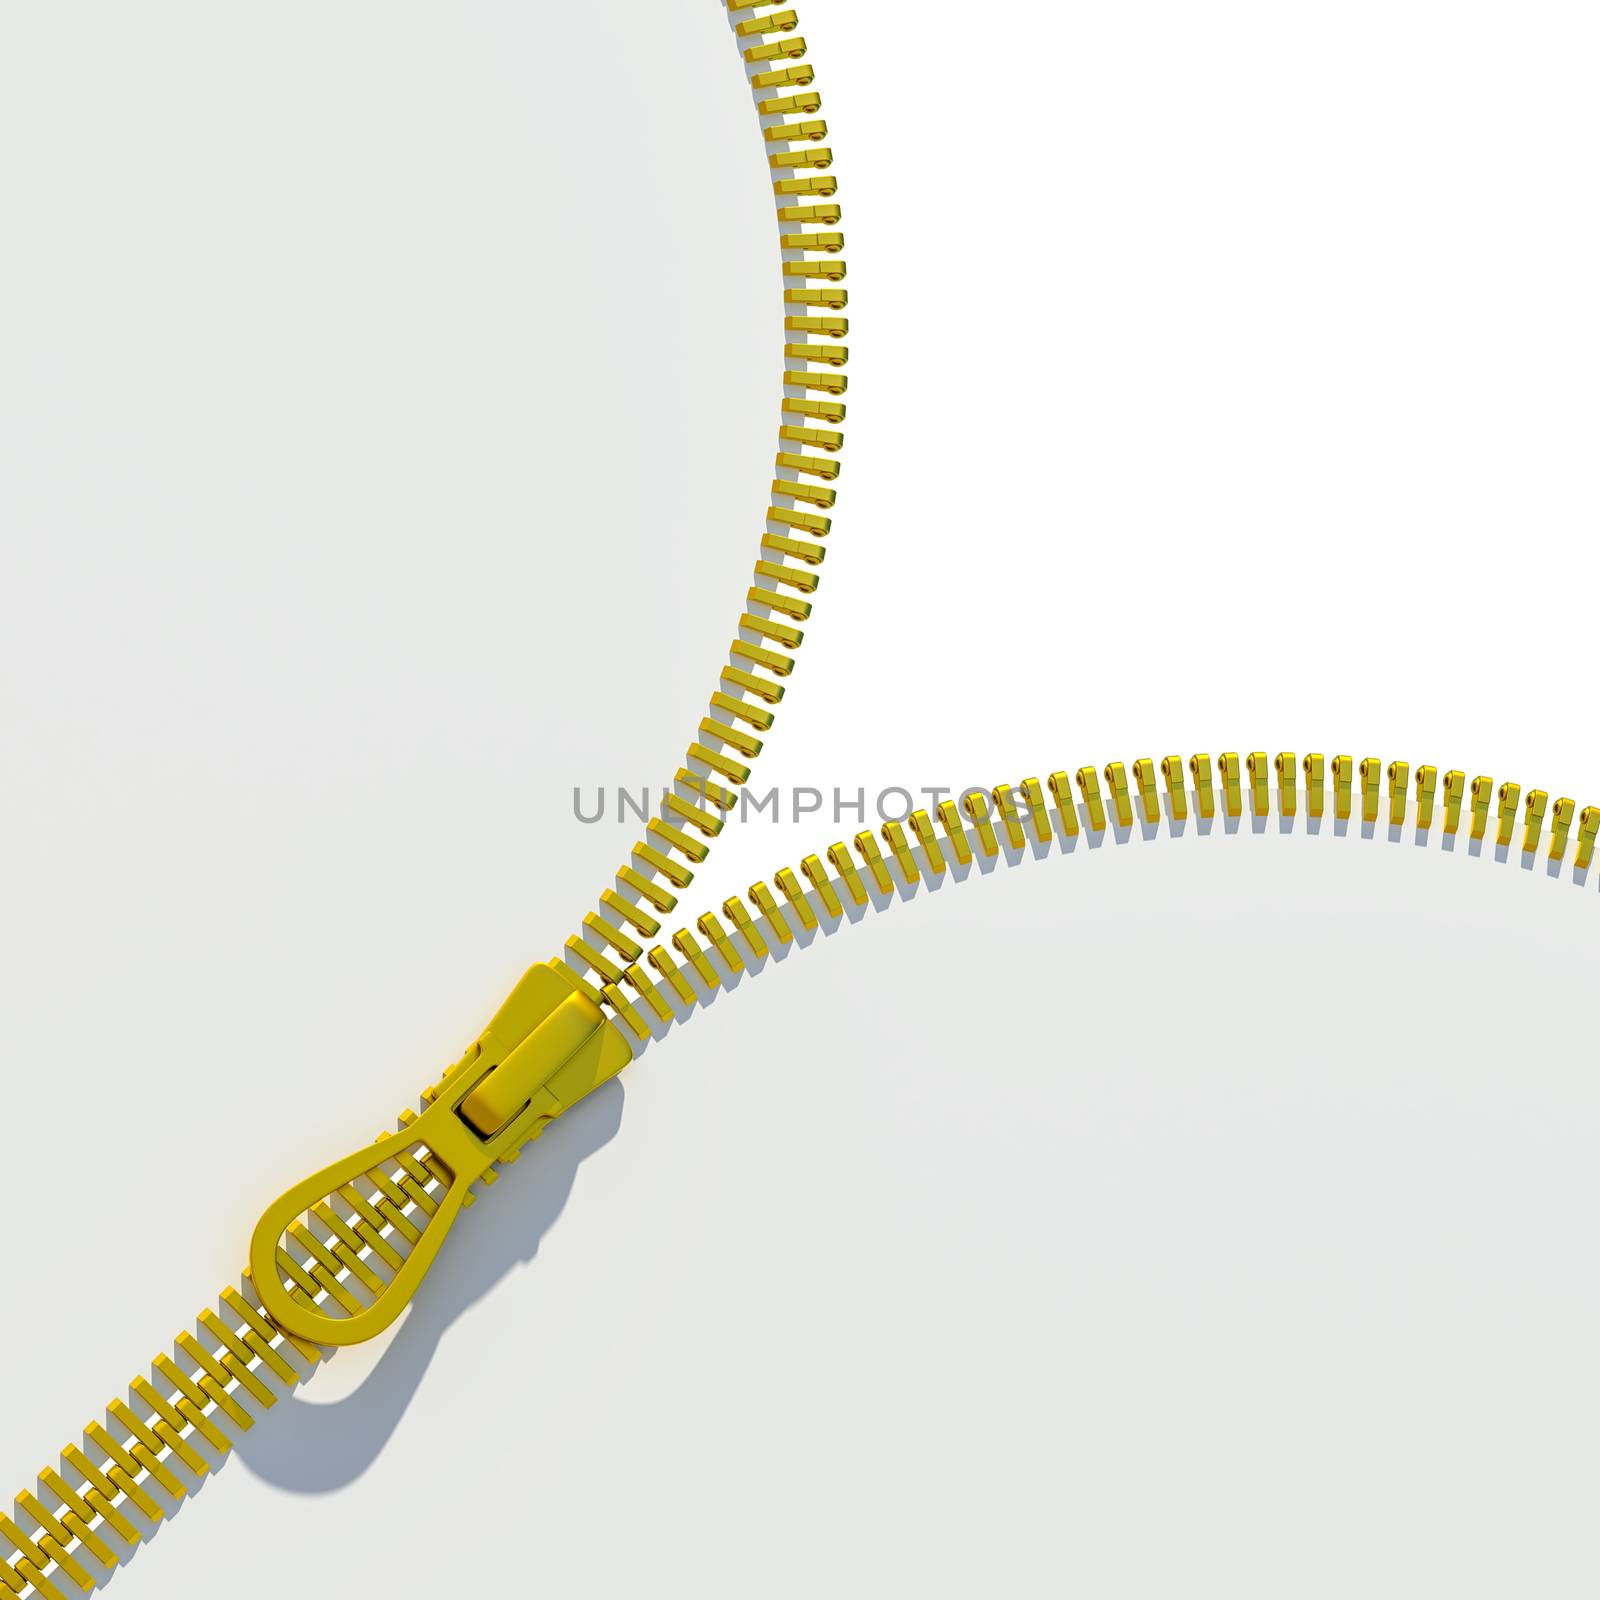 Opened zipper revealing a white background. 3d illustration